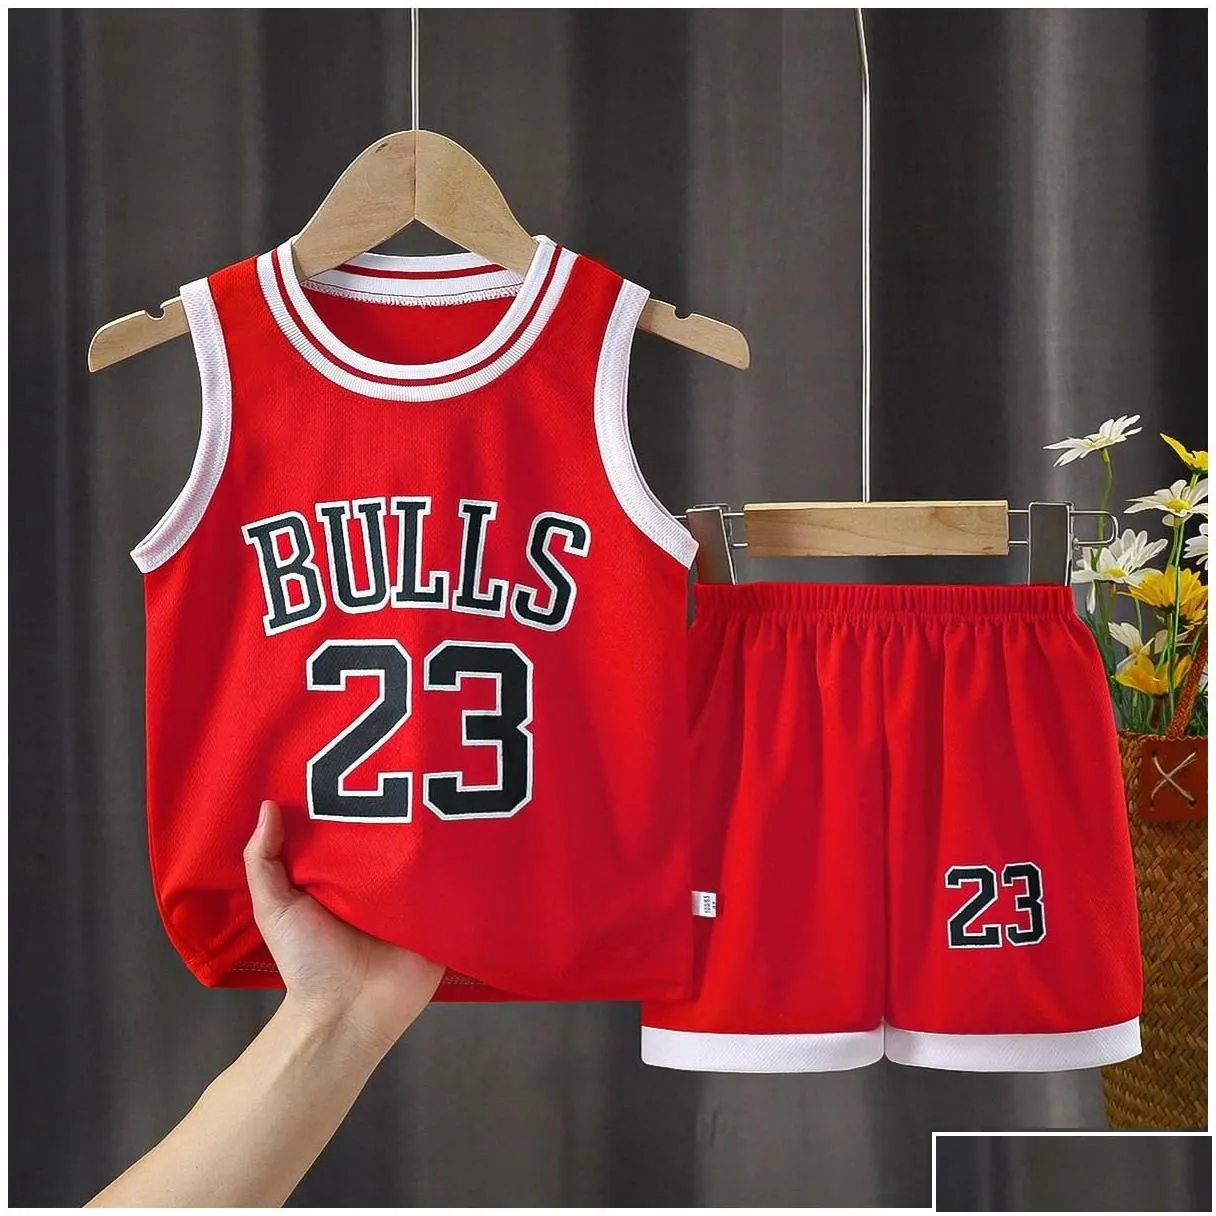 Yoga Outfit Jerseys Kids Summer Boys T-Shirt Quick Dry Basketball Uniform Set Digital Print Team Toddler 3-12 Years Old Clothing Red